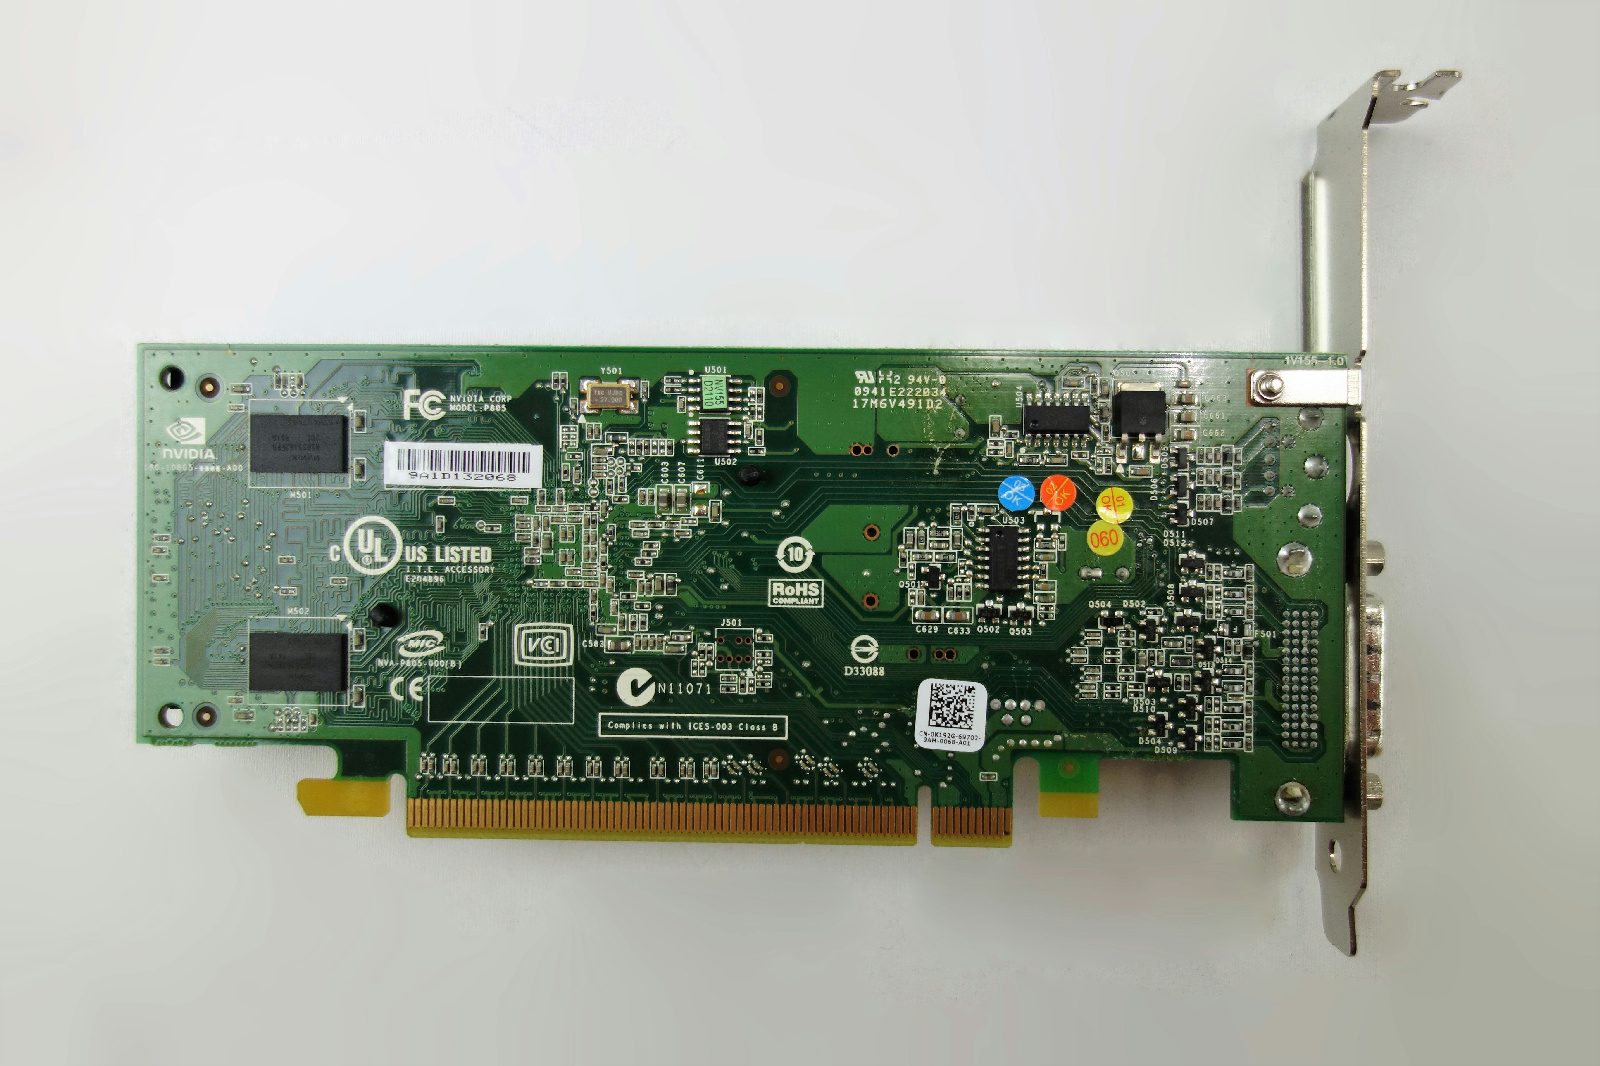 NVIDIA Quadro FX 370 Low Profile Graphics Card for Small Form Factor